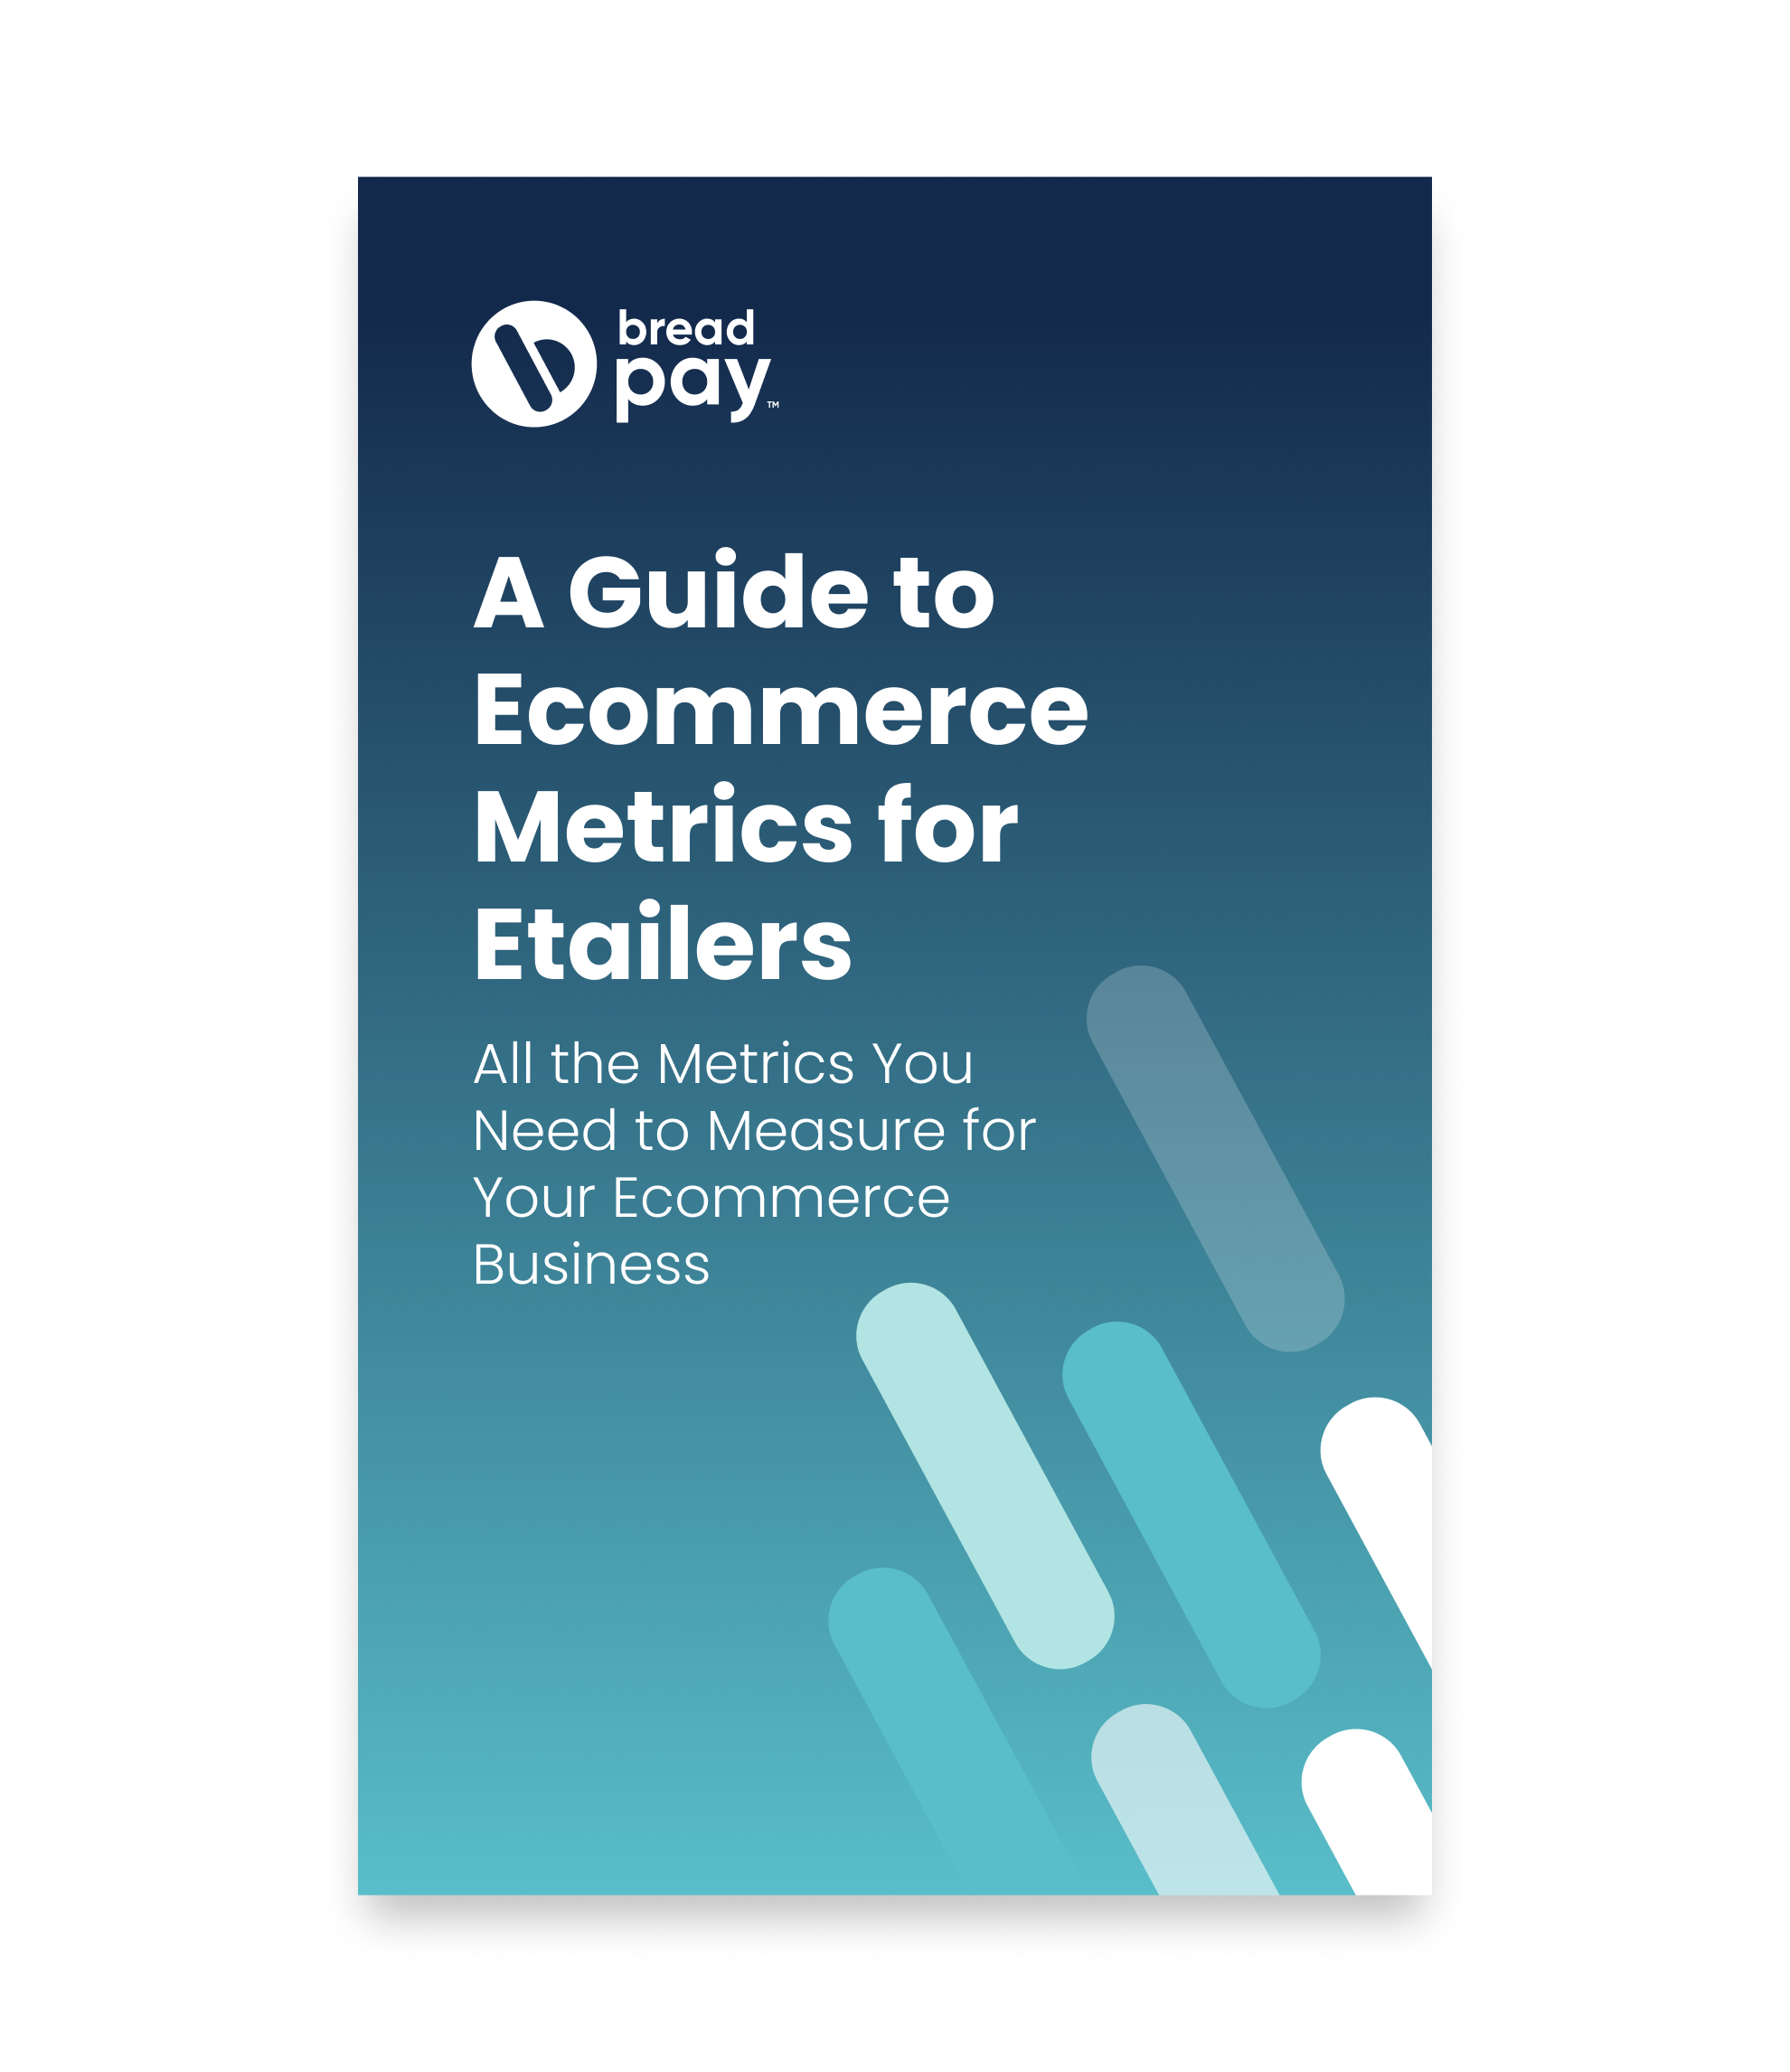 A Guide to Ecommerce Metrics for Etailers